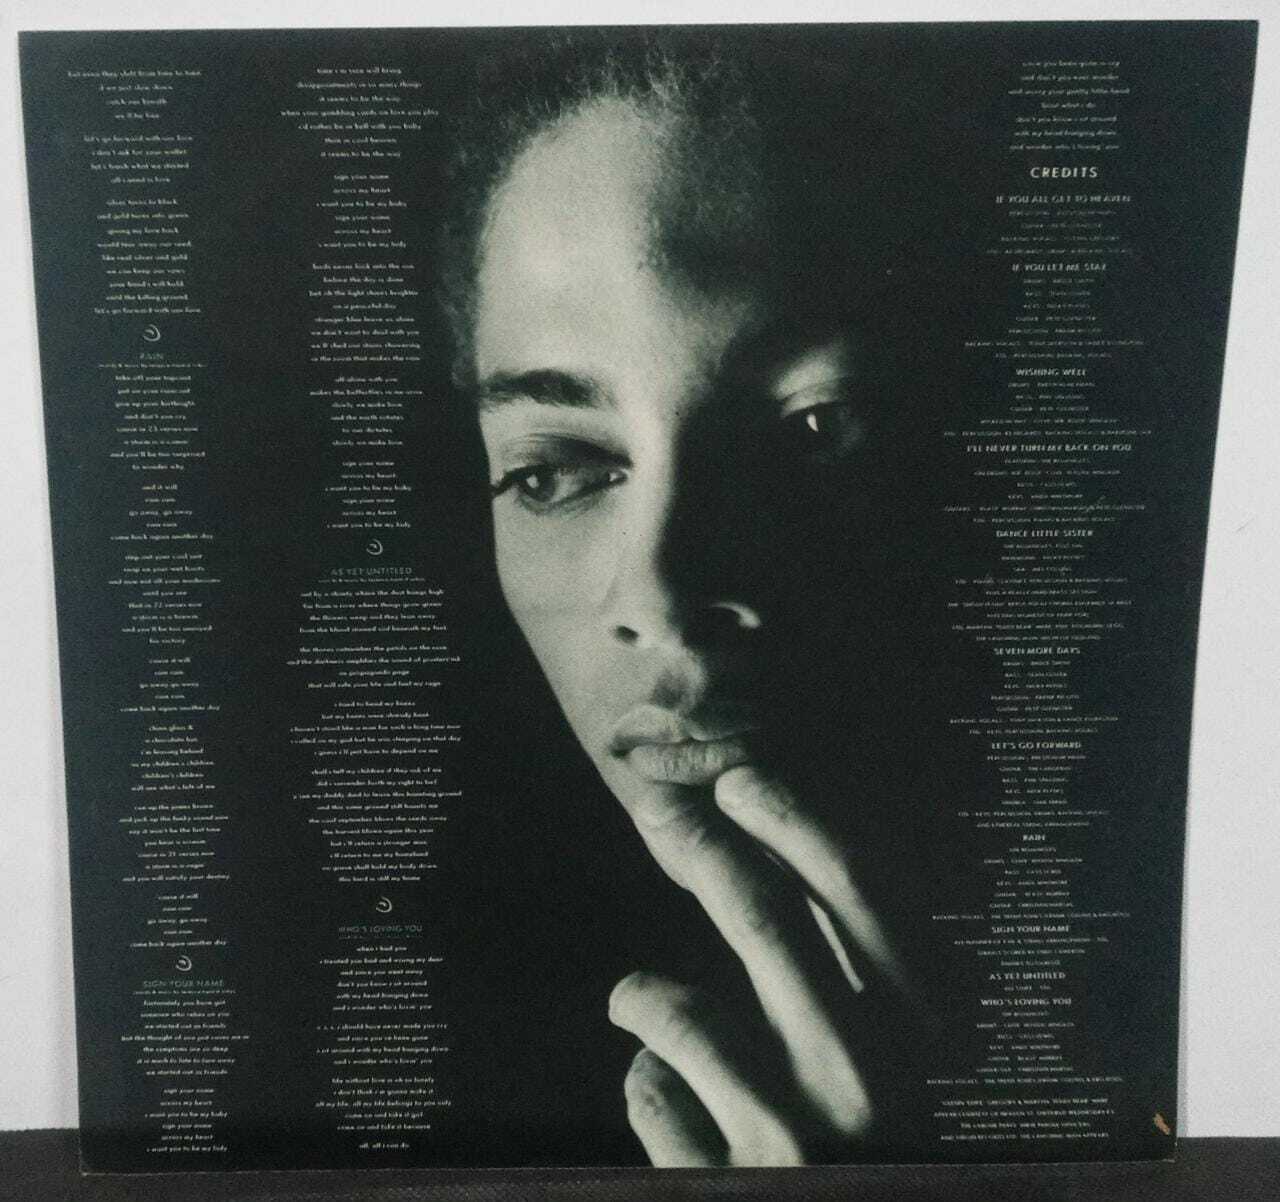 Vinil - Terence Trent DArby - Introducing The Hardline According To